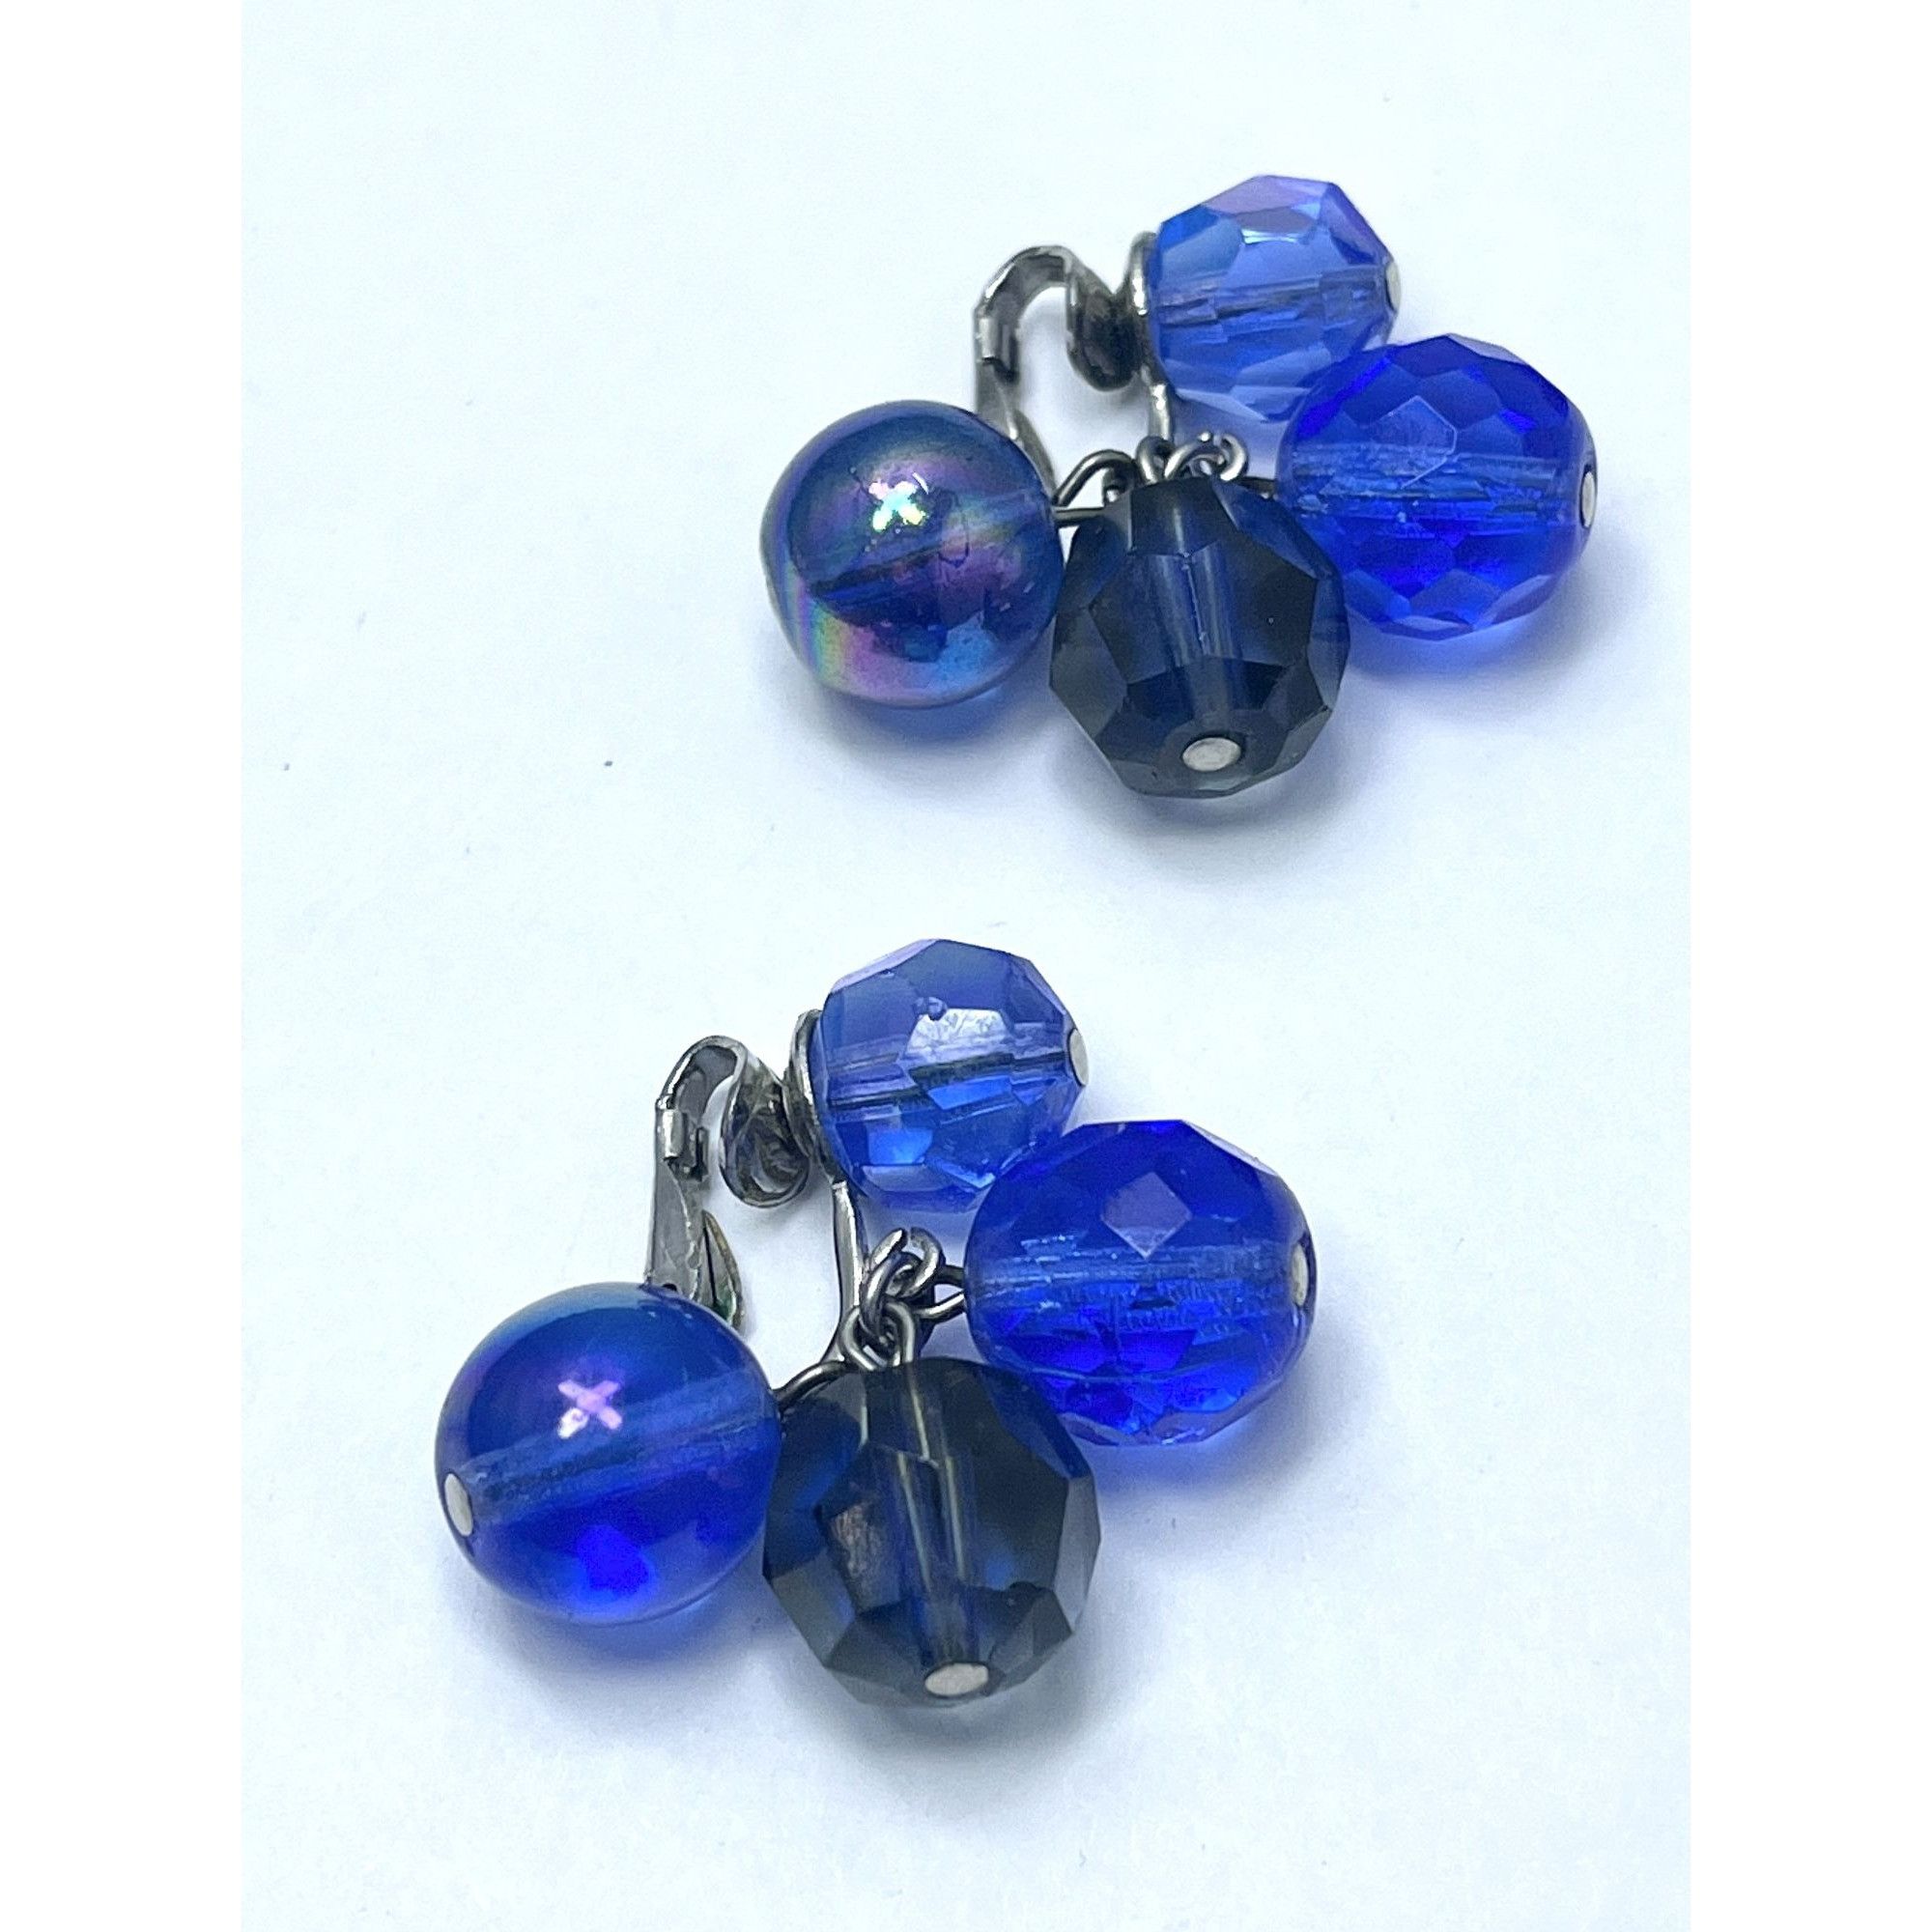 Vogue Vintage Vogue Blue Crystal Glass Earrings Size ONE SIZE - 1 Preview